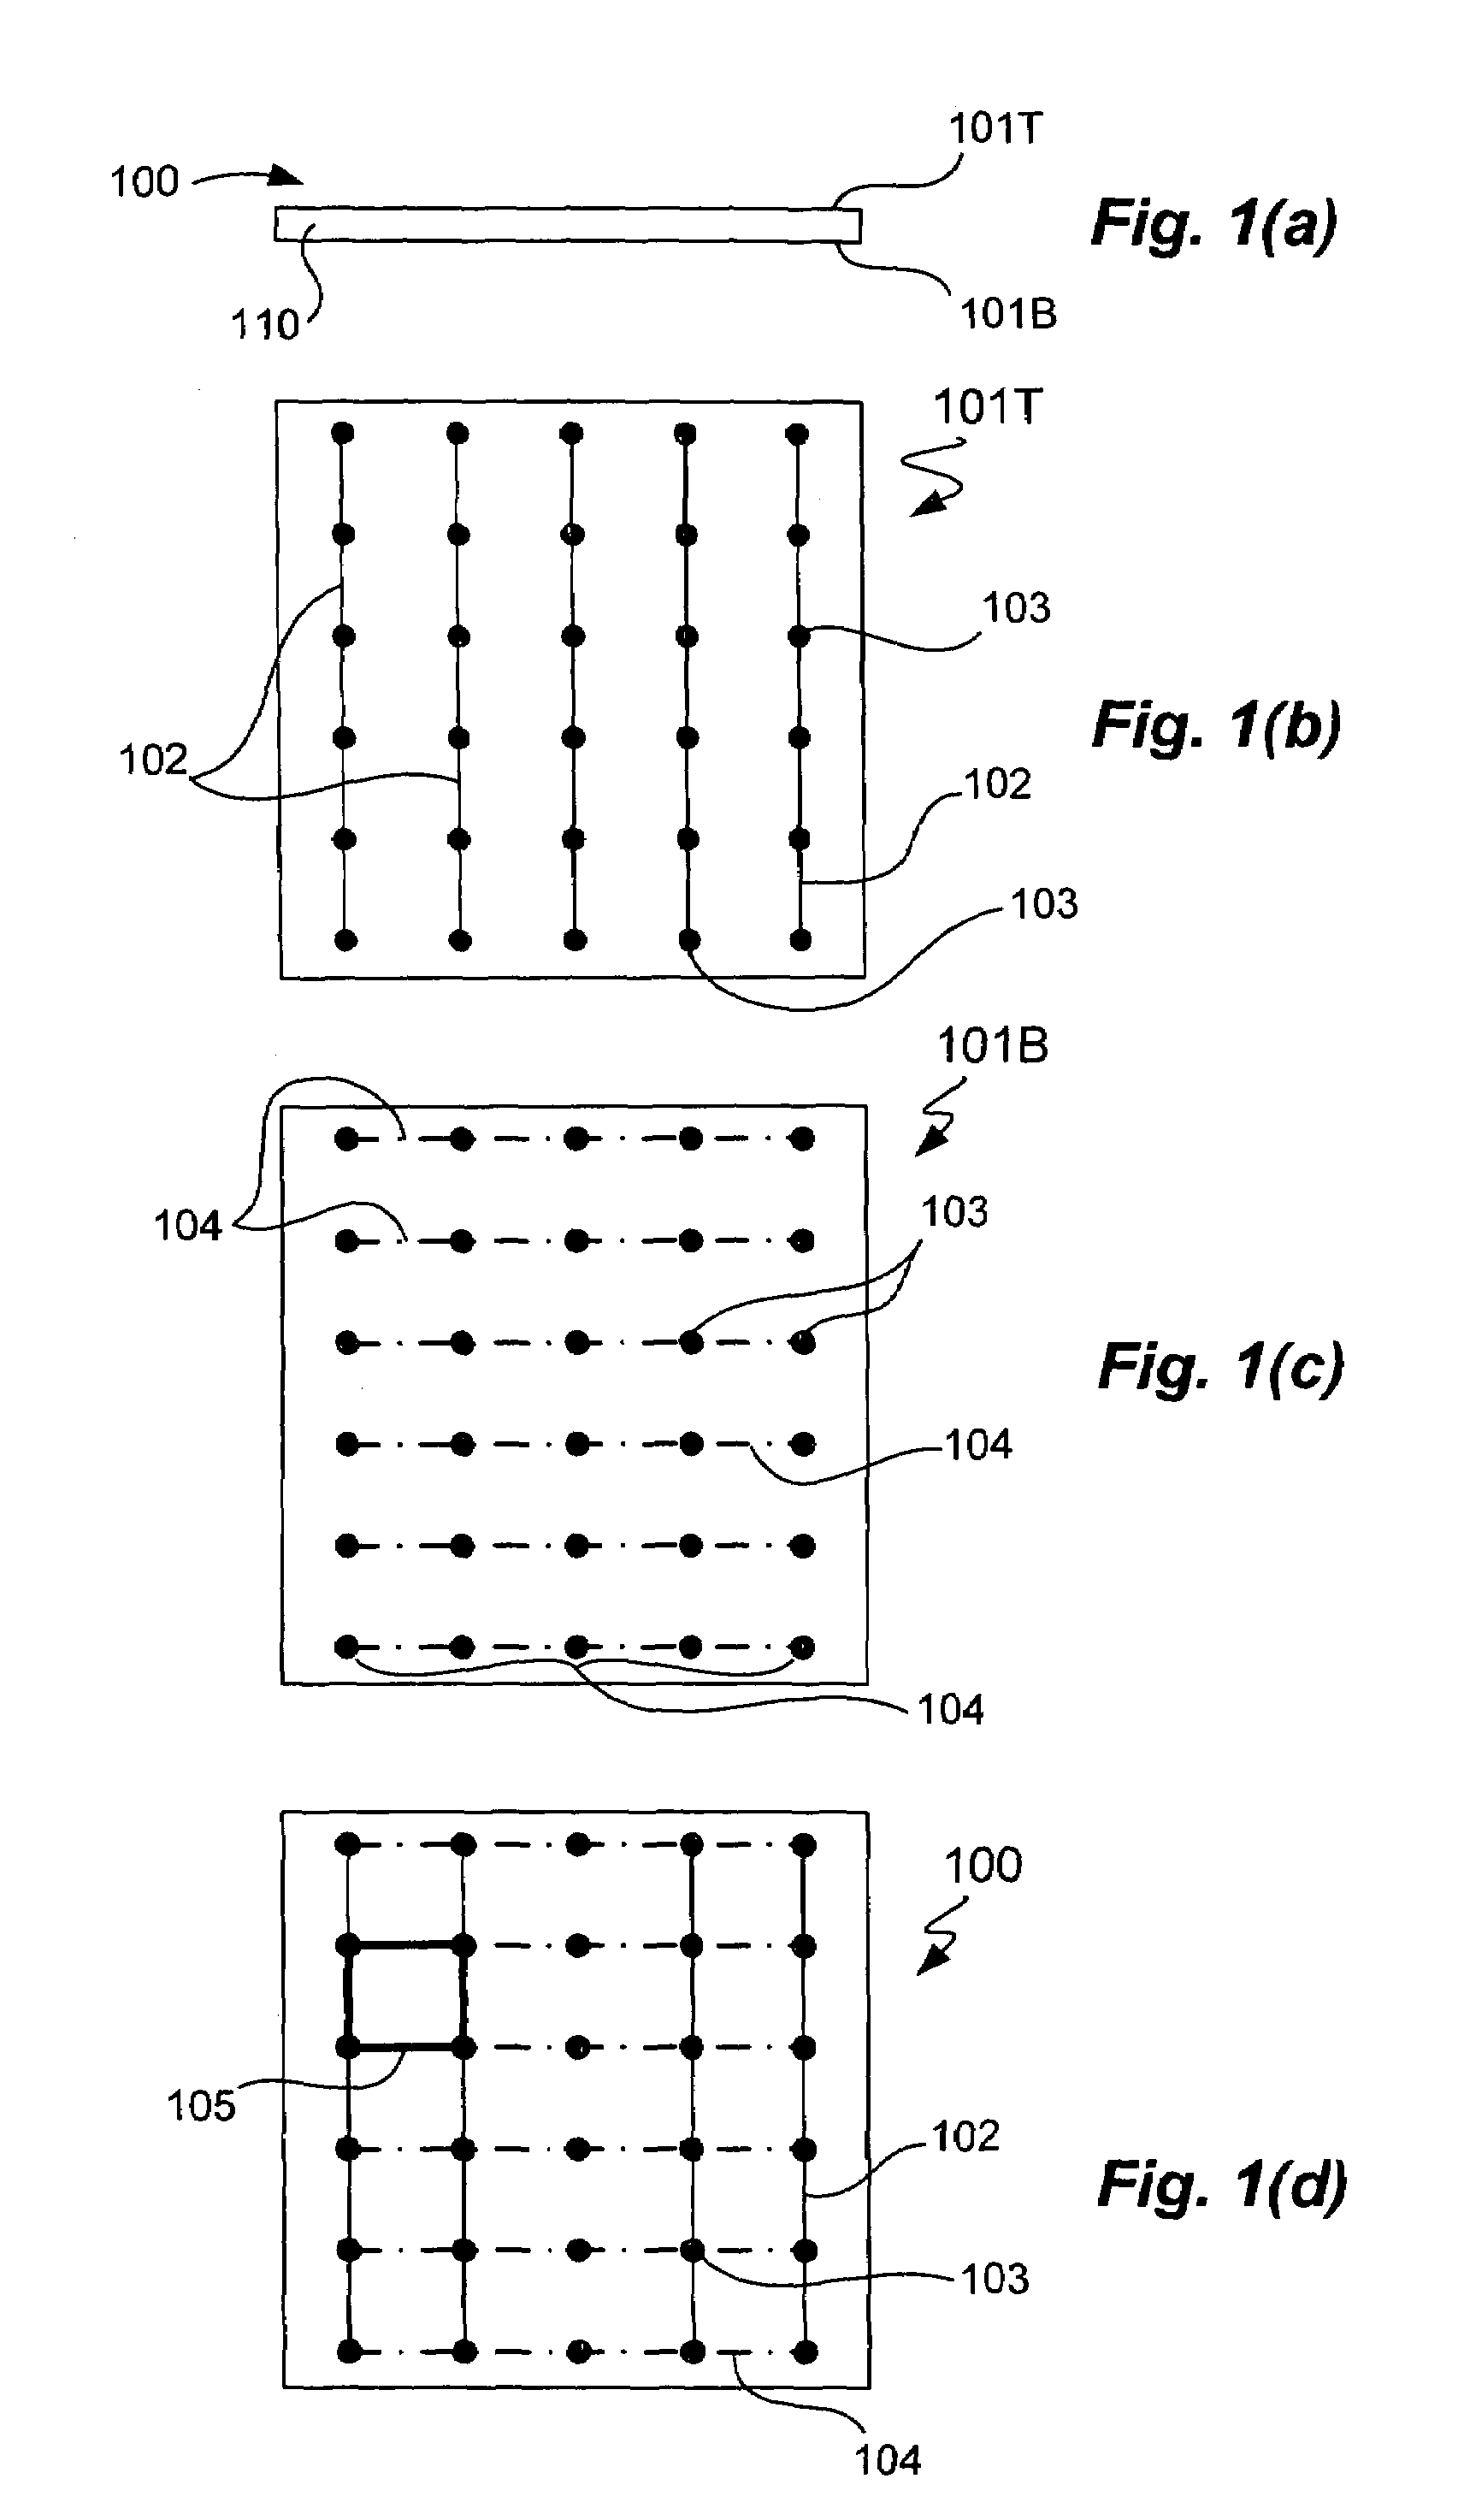 Hybrid ground grid for printed circuit board